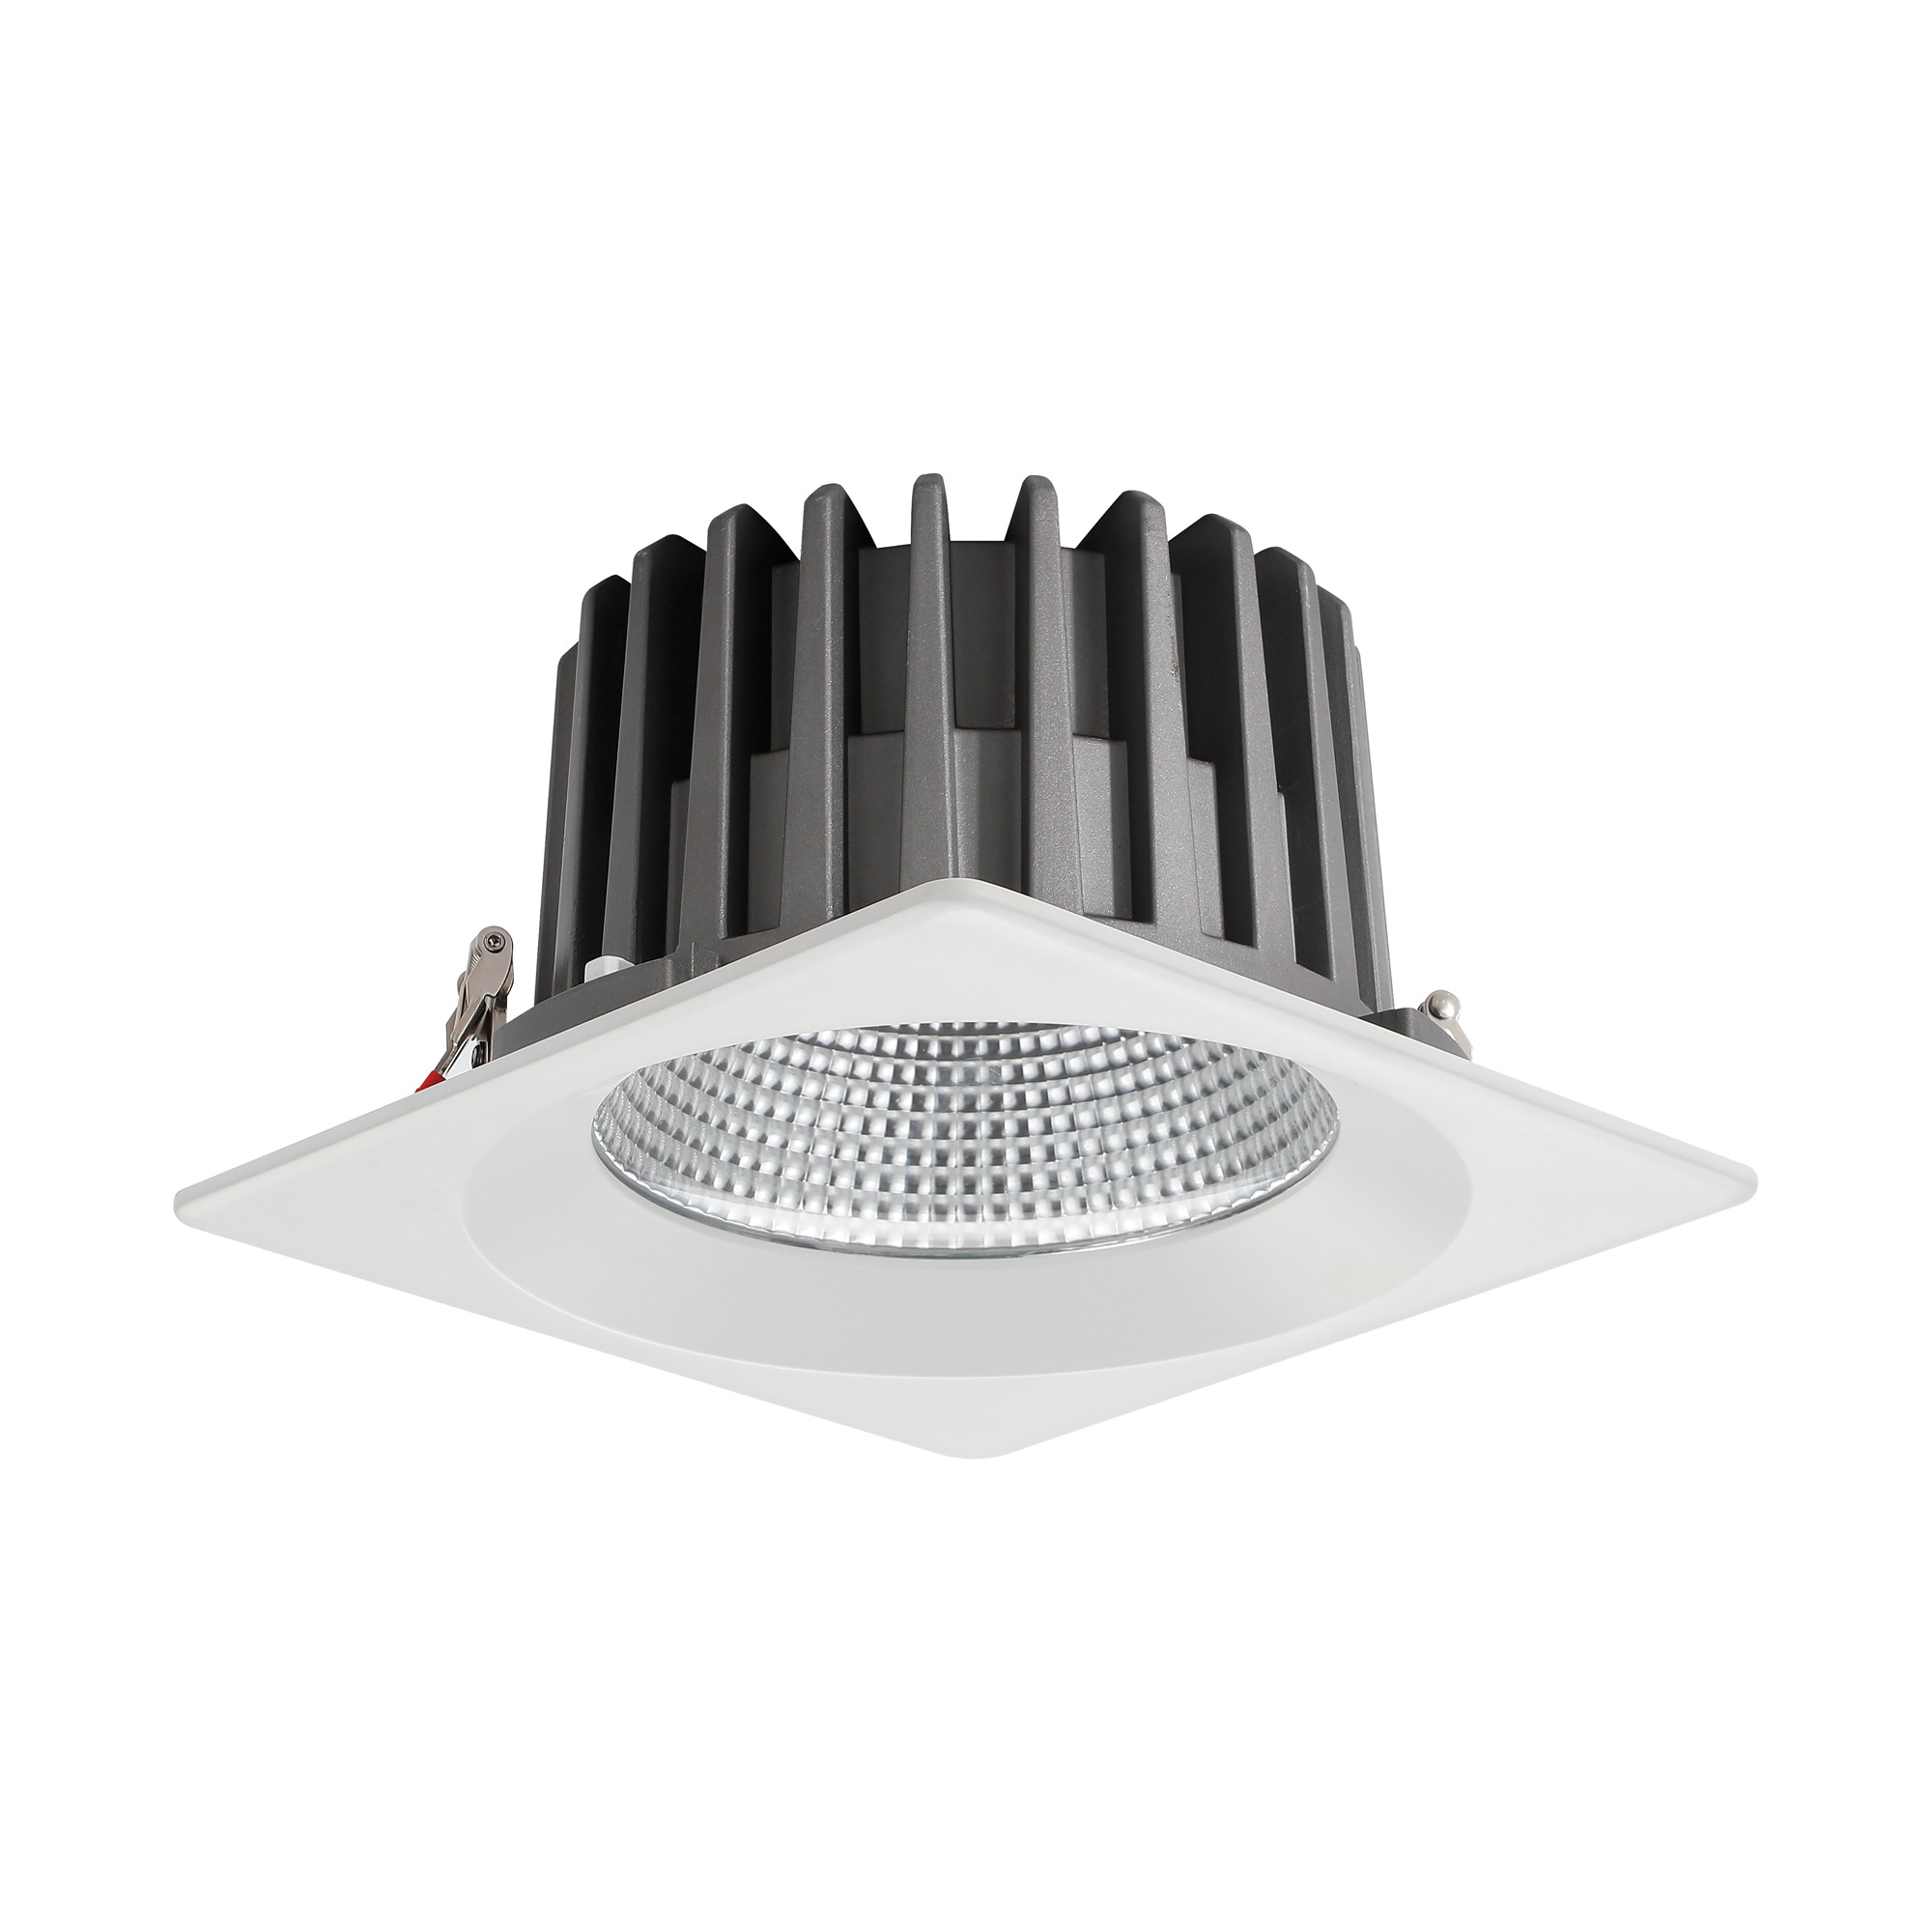 DL200083  Bionic 50, 50W, 1200mA, White Deep Square Recessed Downlight, 4400lm ,Cut Out 175mm, 50° , 4000K, IP44, DRIVER INC., 5yrs Warranty.